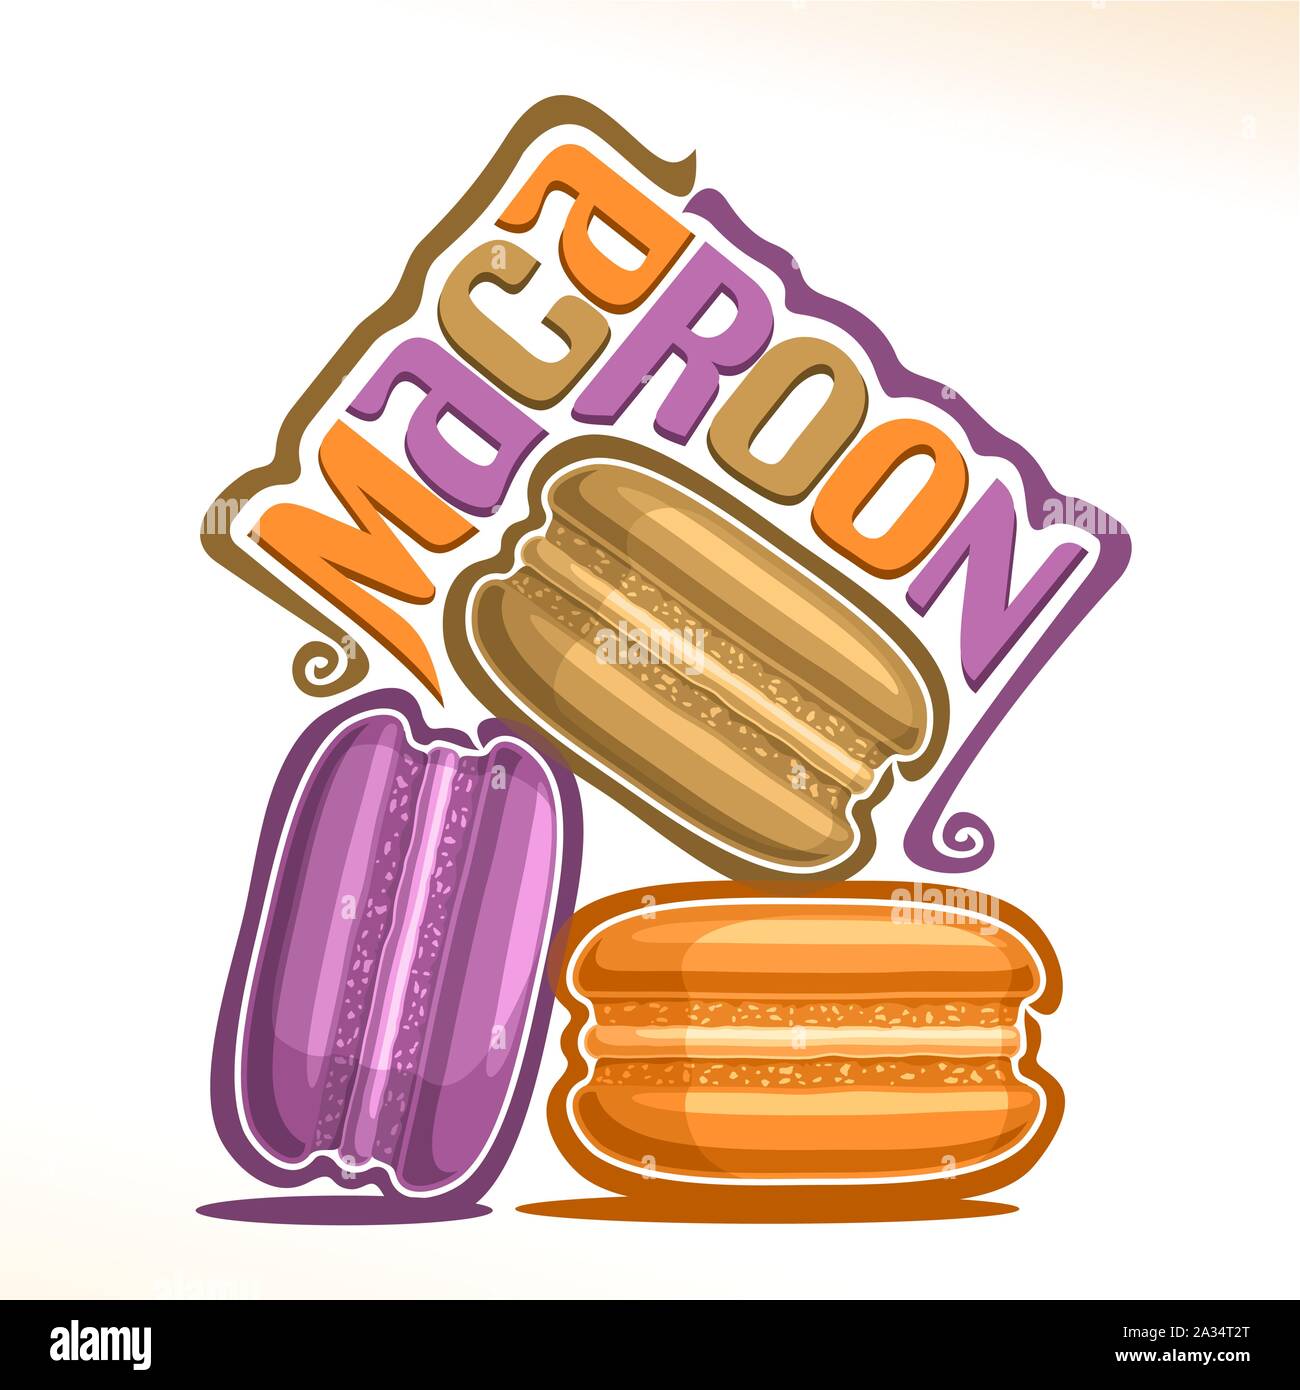 Vector logo for Macaroon, illustration of pile colorful macarons for cafe menu, original font for word macaroon, poster with heap of fresh purple, cho Stock Vector